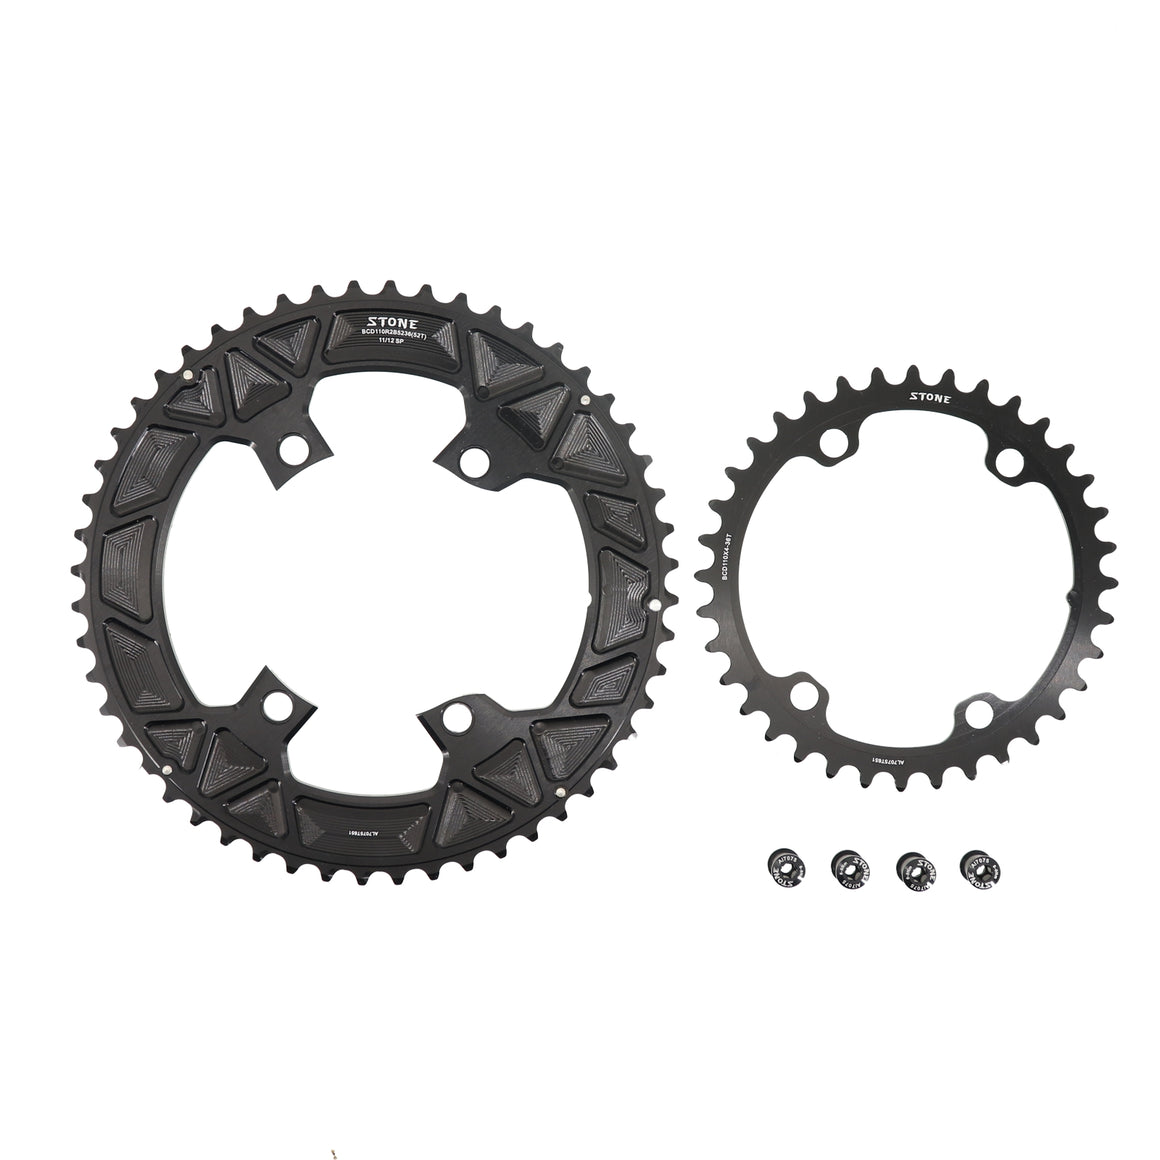 Stone 52/36 12 Speed Chainrings